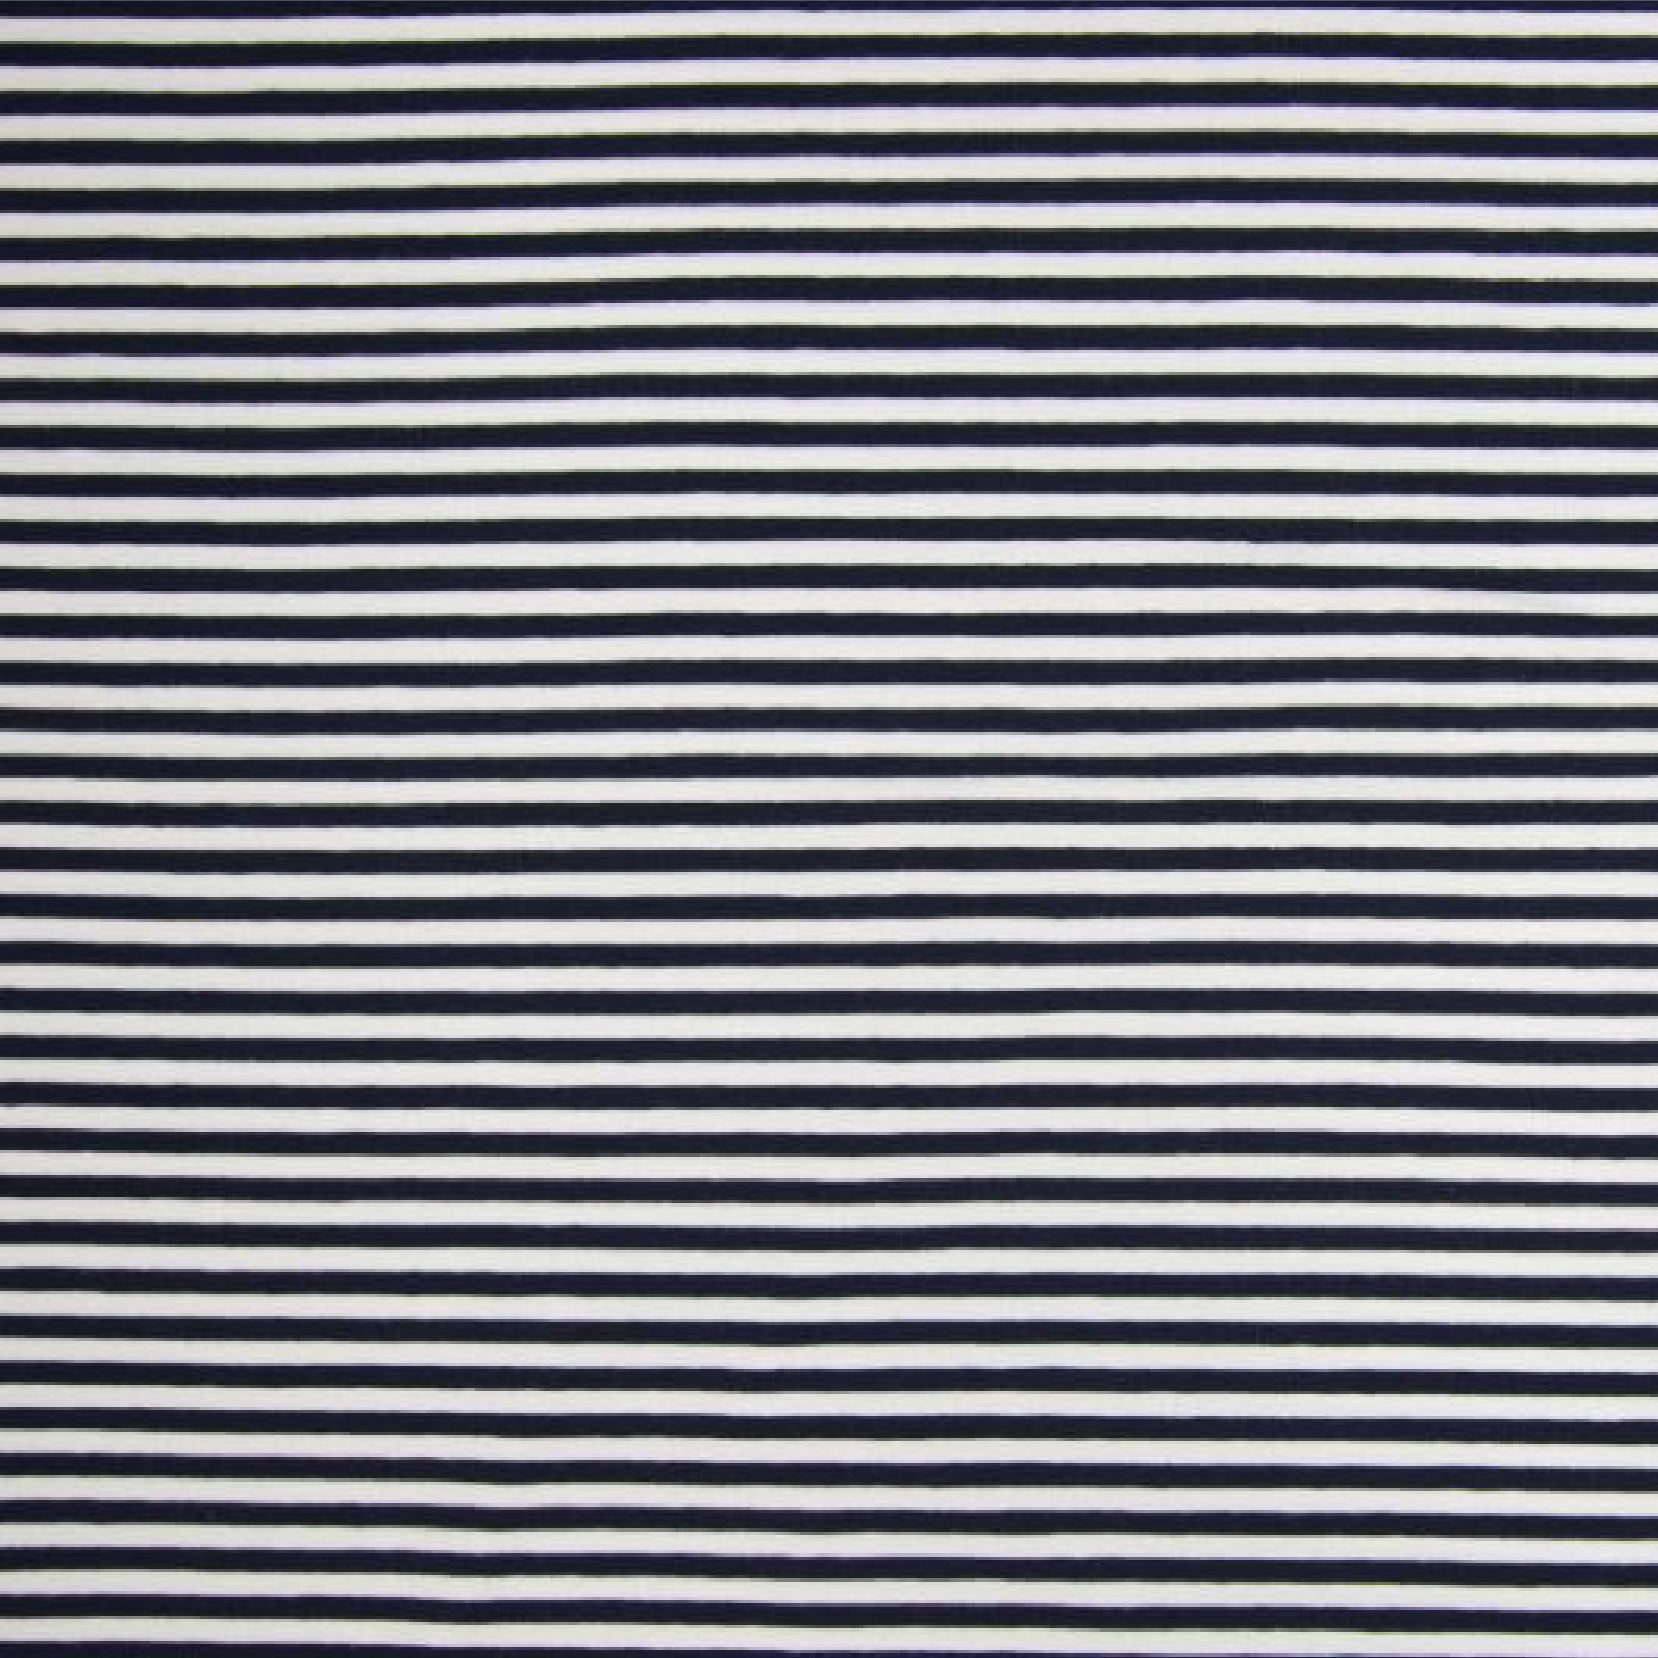 Striped navy blue and white 5 mm - Striped jersey